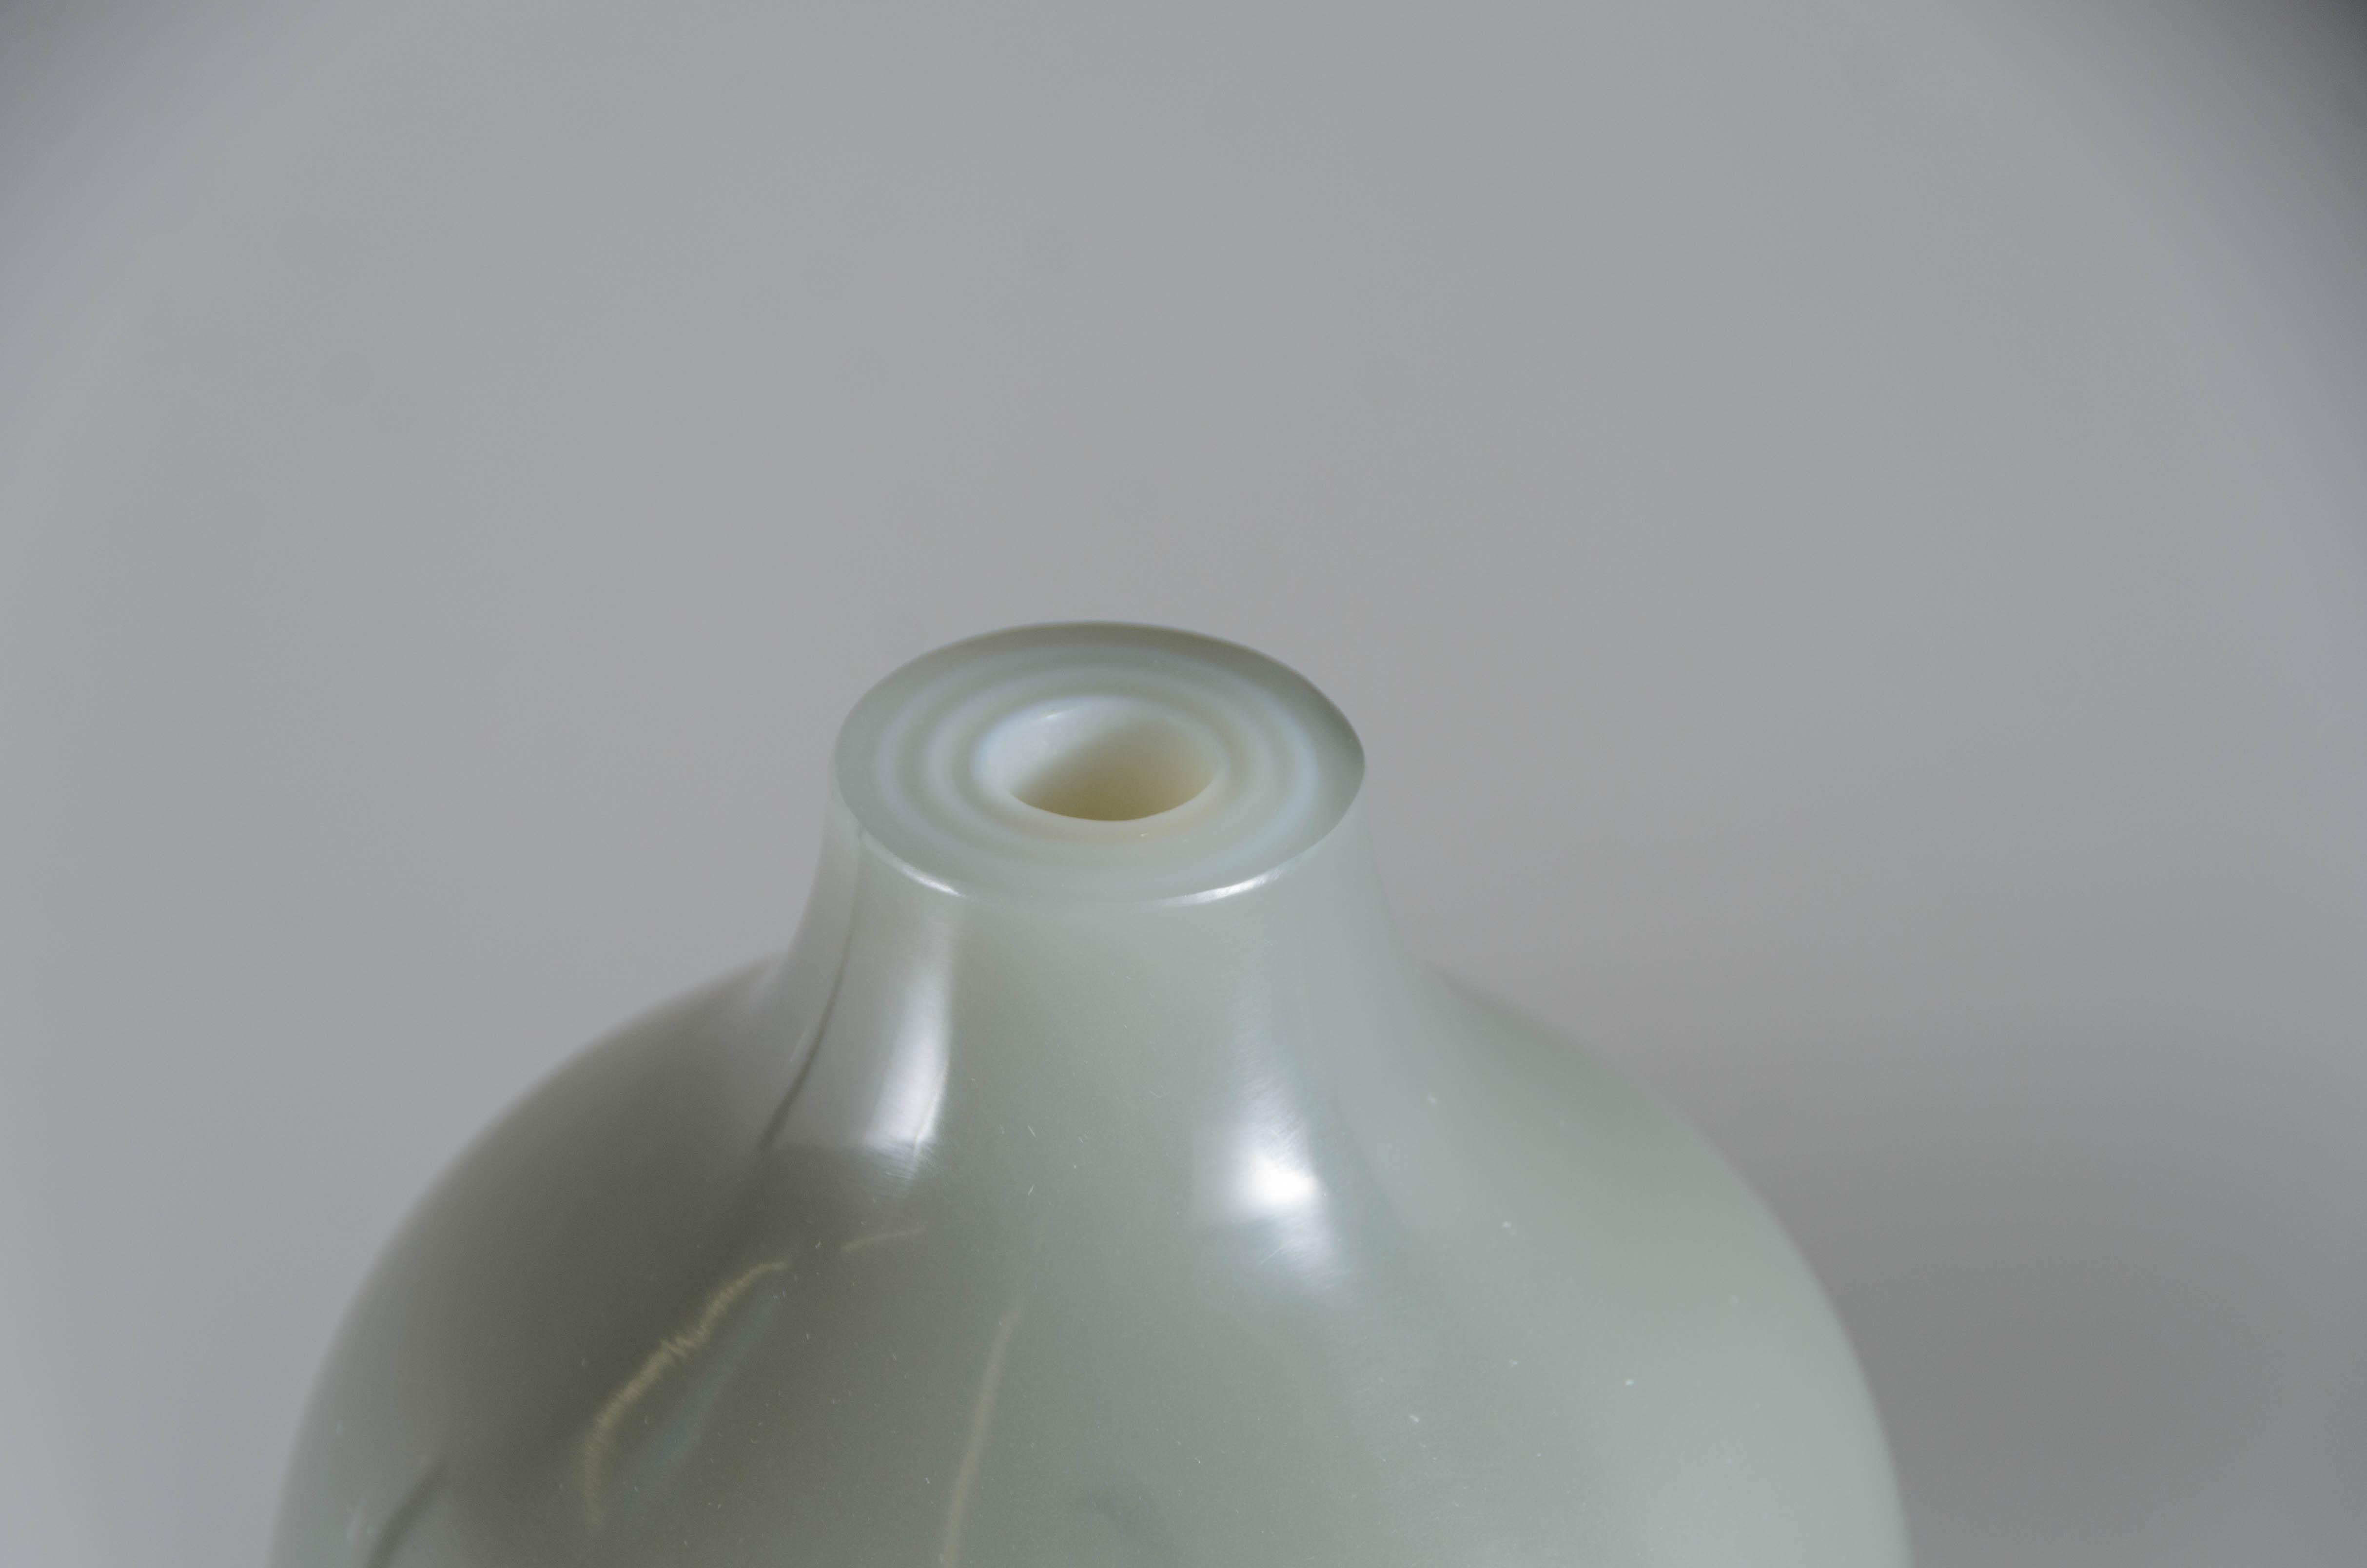 Tall gourd vase.
Grey peking glass.
Hand carved.
Limited Edition
Measures: 8